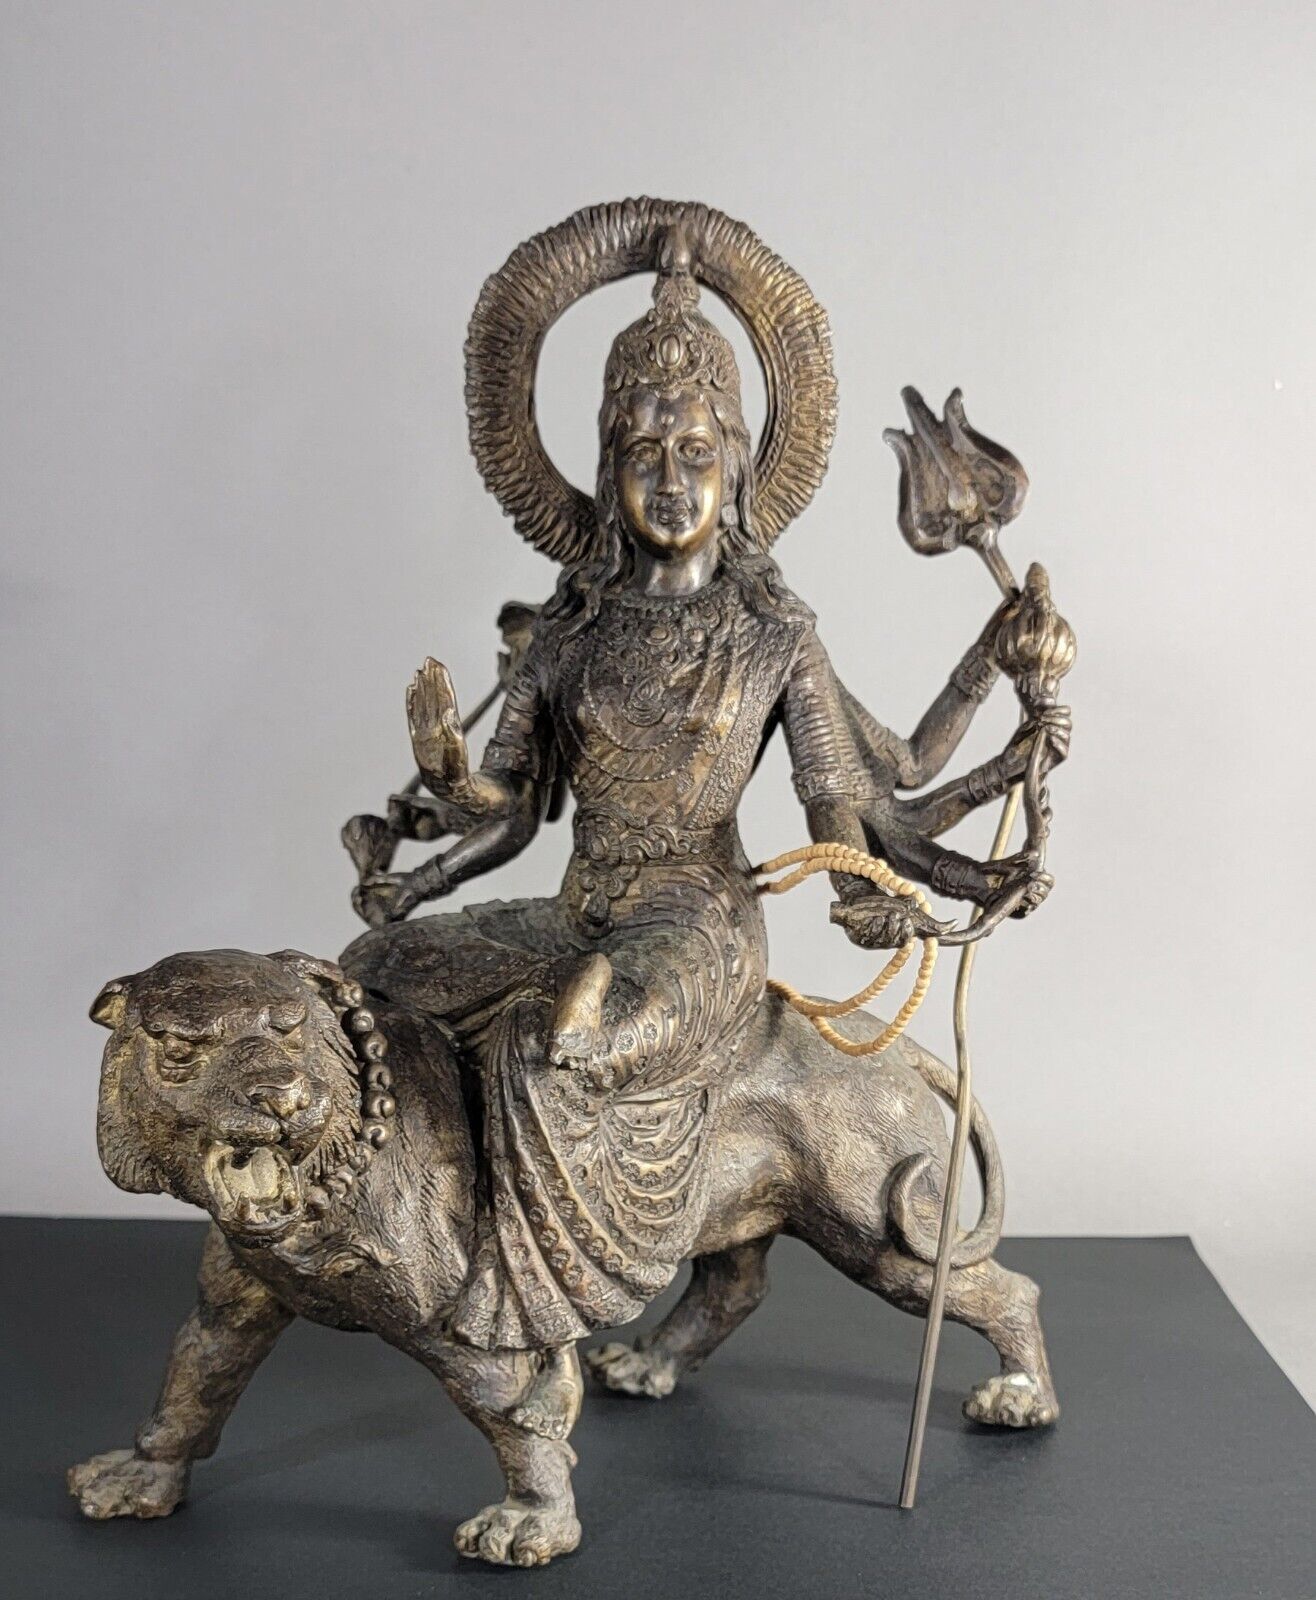 Antique Indonesian Bronze / Alloy Duga Hindu Goddess Seated On A Tiger Statue